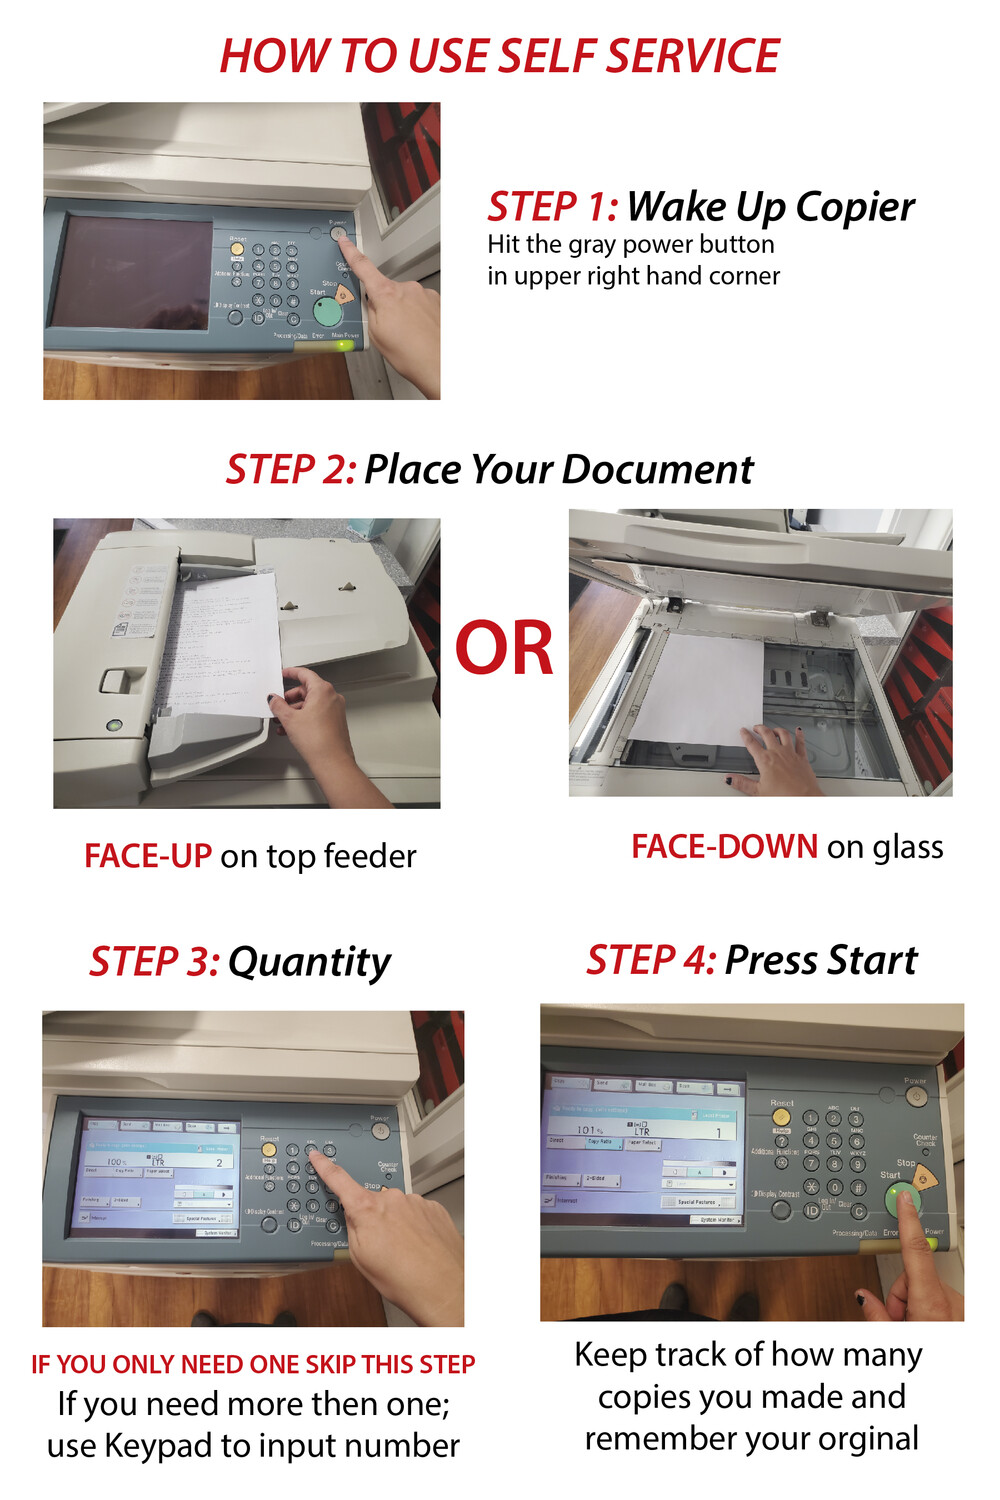 how to use the self service copier